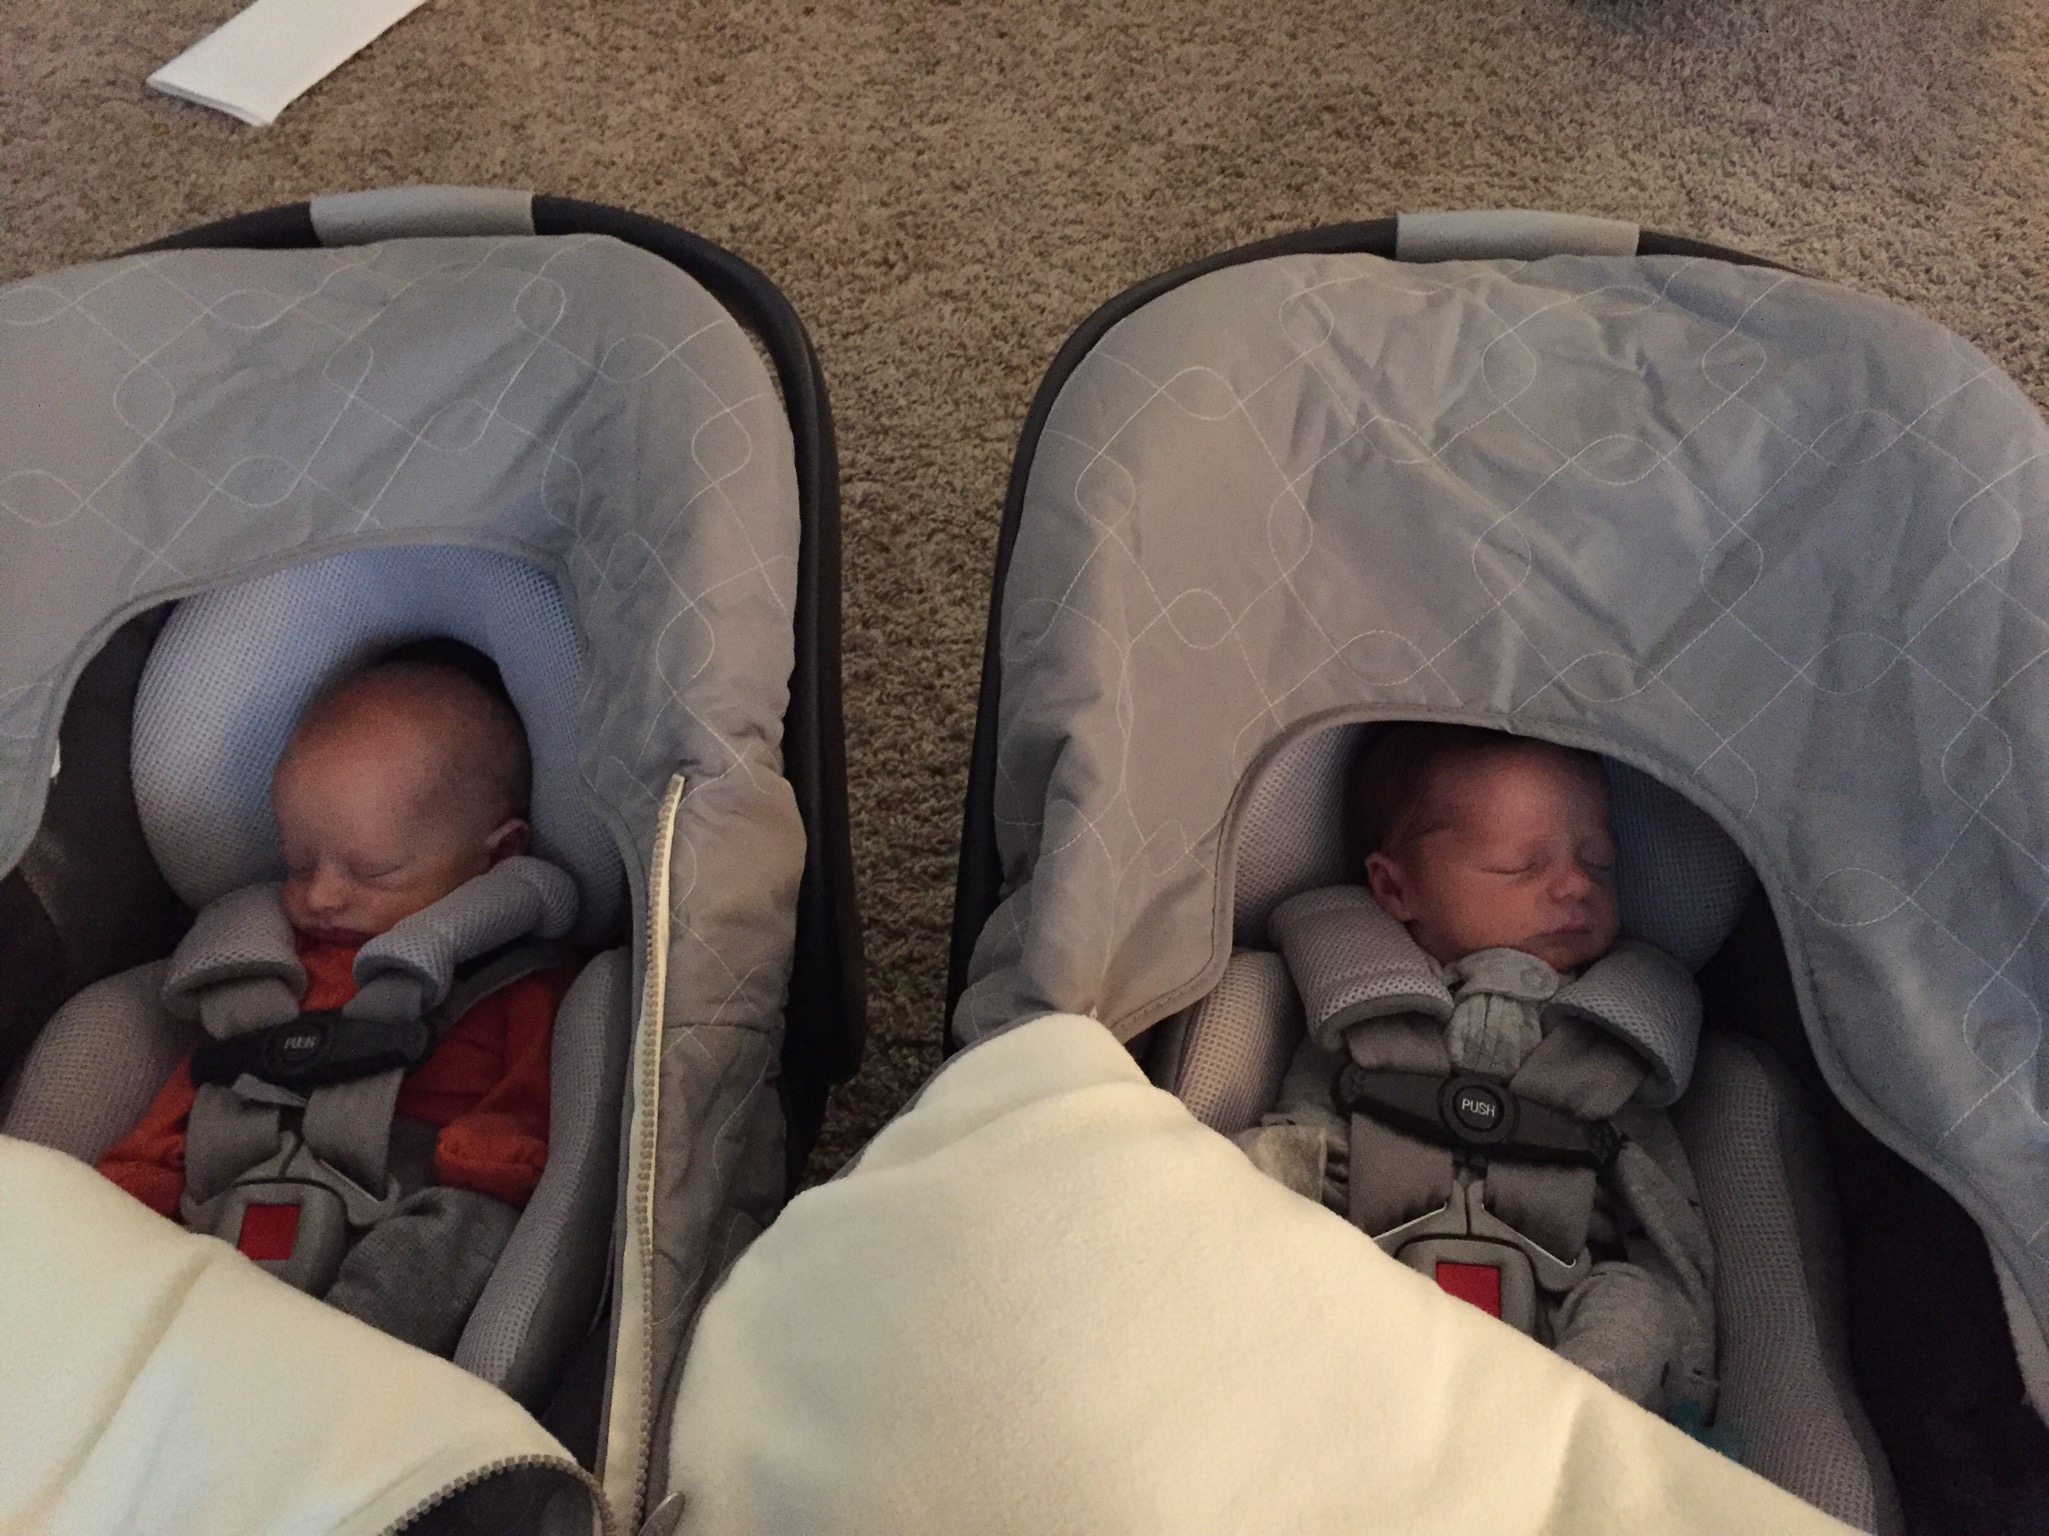 After the pediatrician, napping in their carseats - 1 week old 